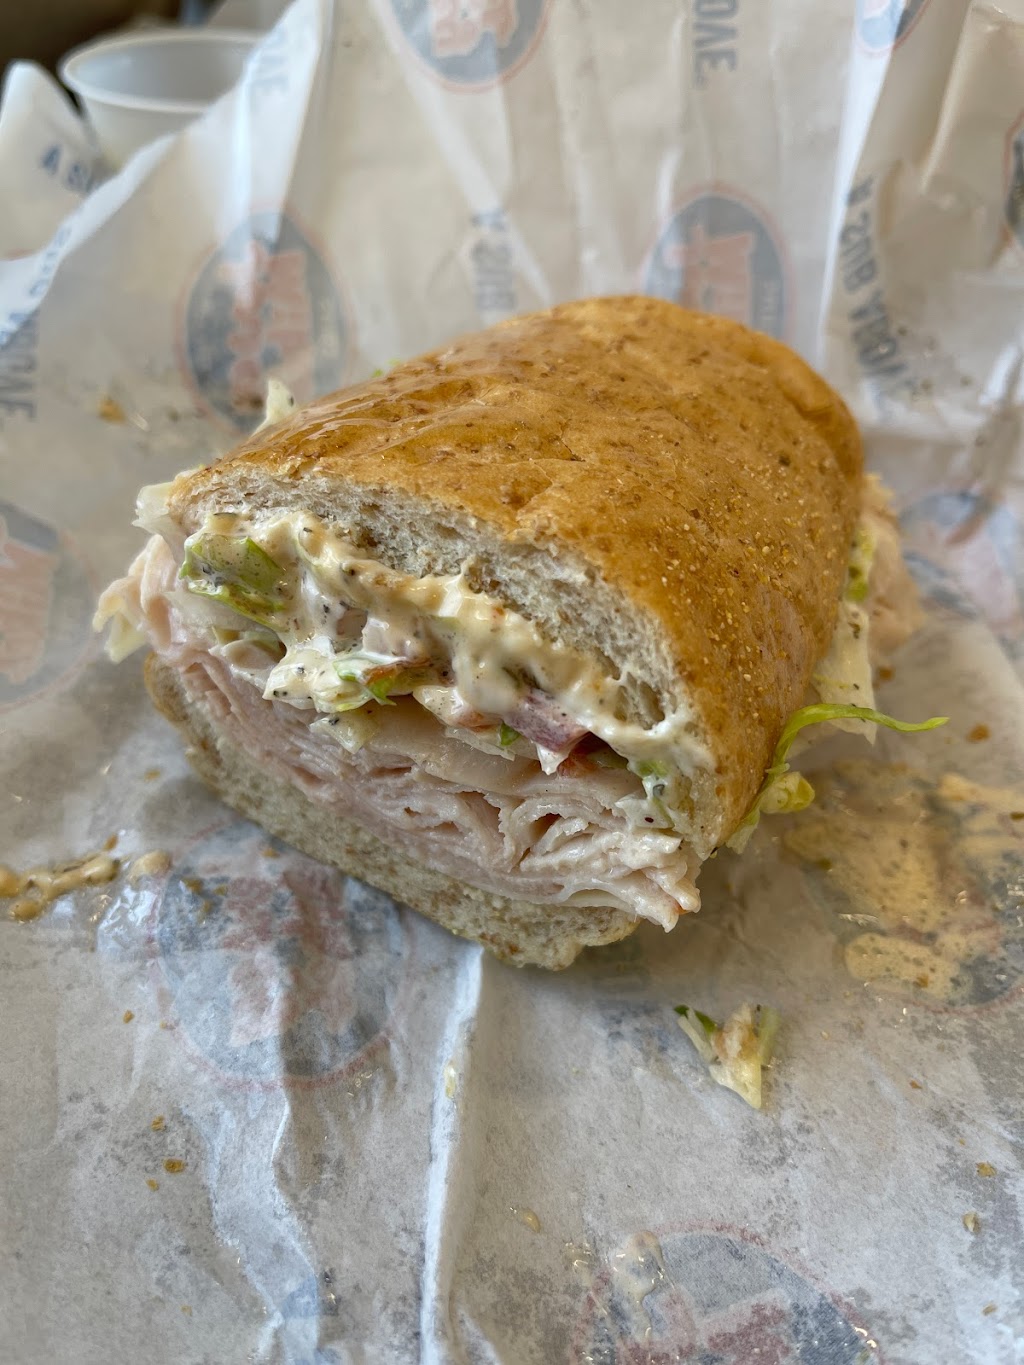 Jersey Mikes Subs | 1576 US-9, Wappingers Falls, NY 12590 | Phone: (845) 297-4270